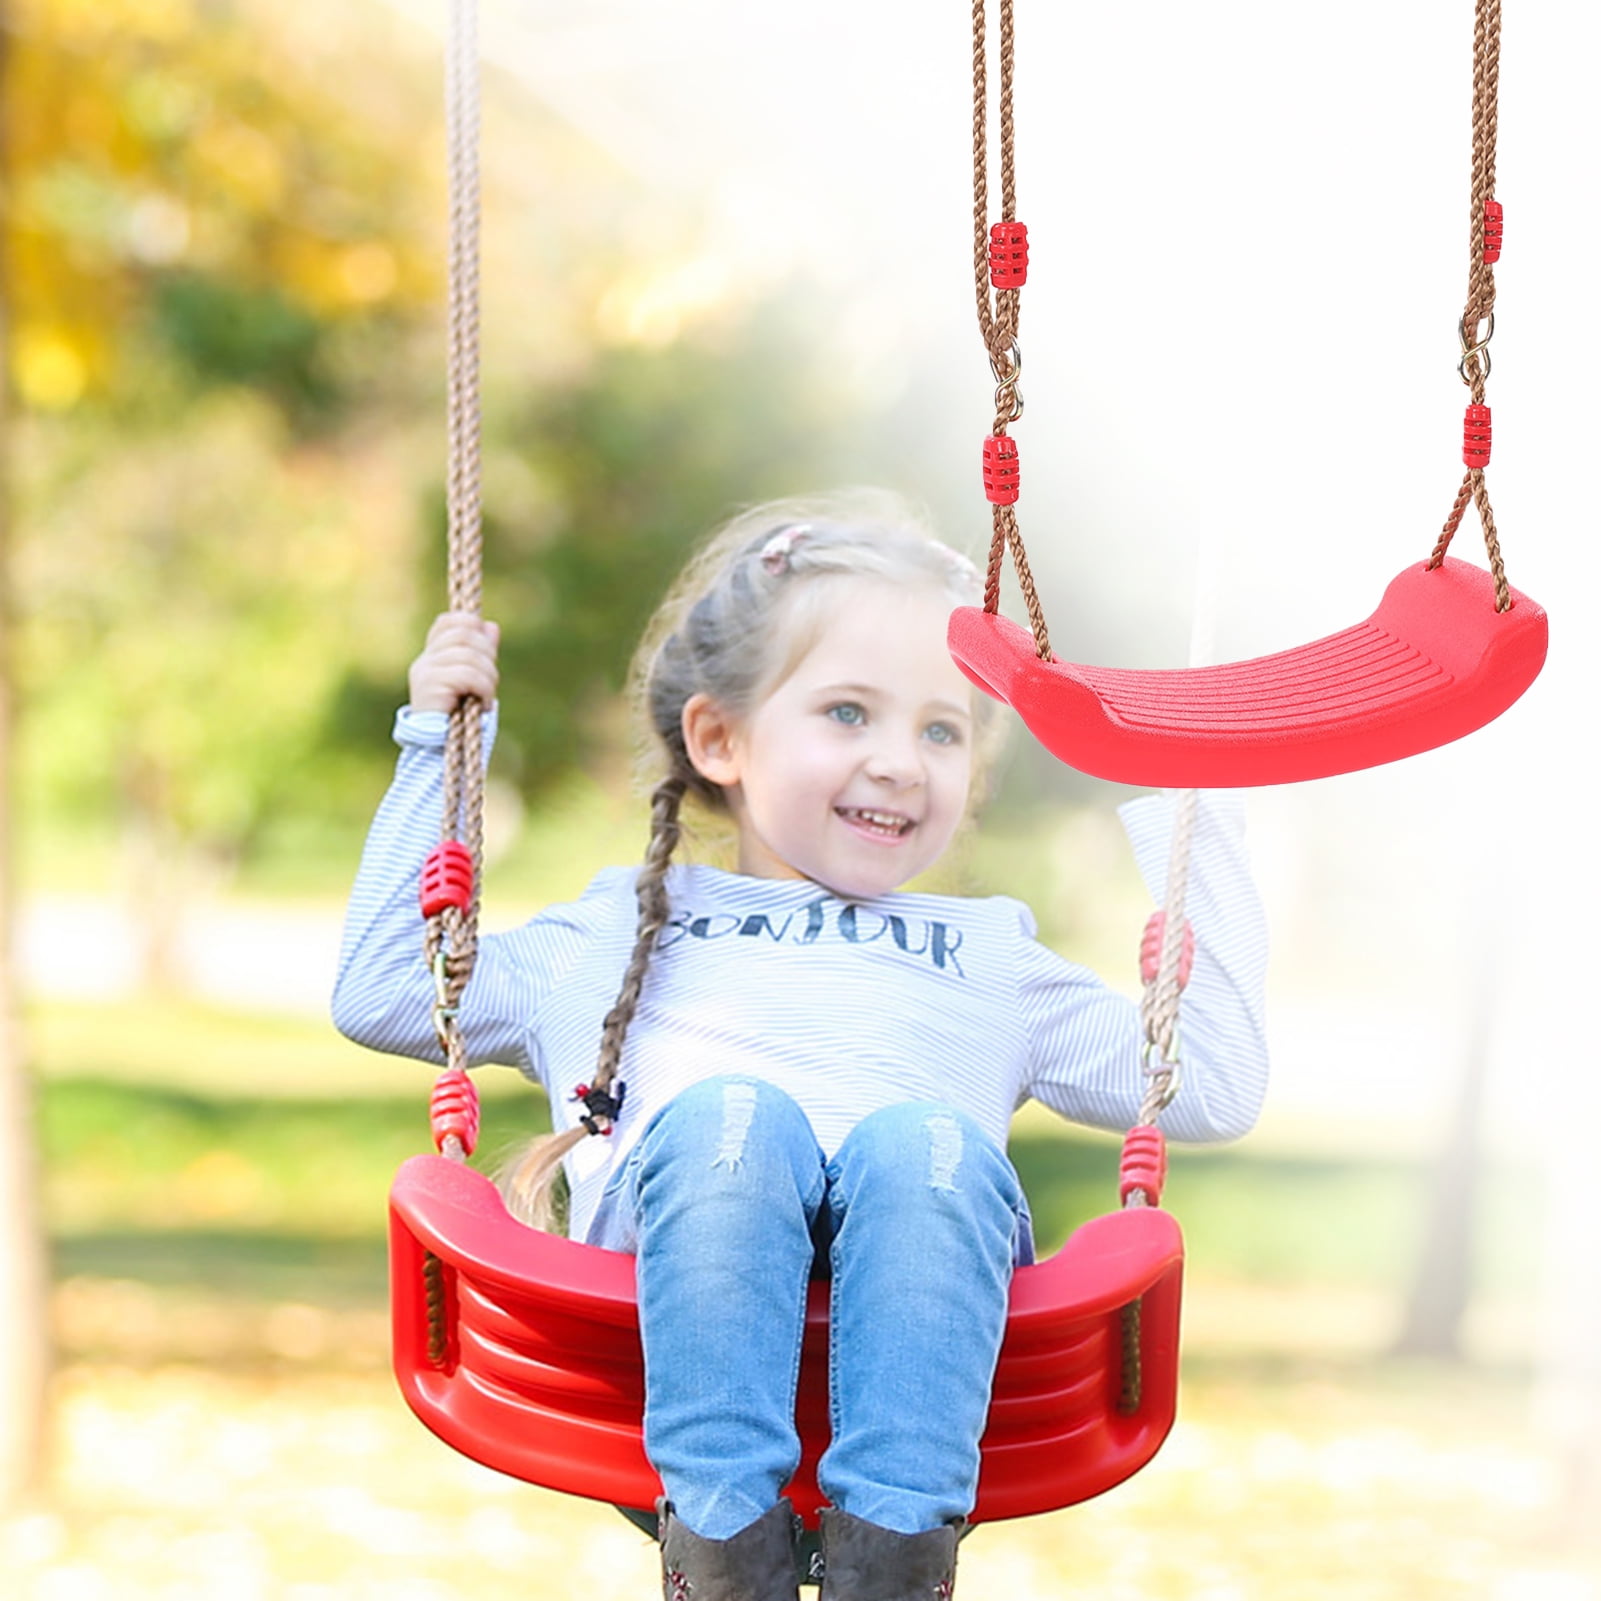 4cm Hard Plastic Swing Seat with Coffee Rope for Kids Play Home Garden Accessory 